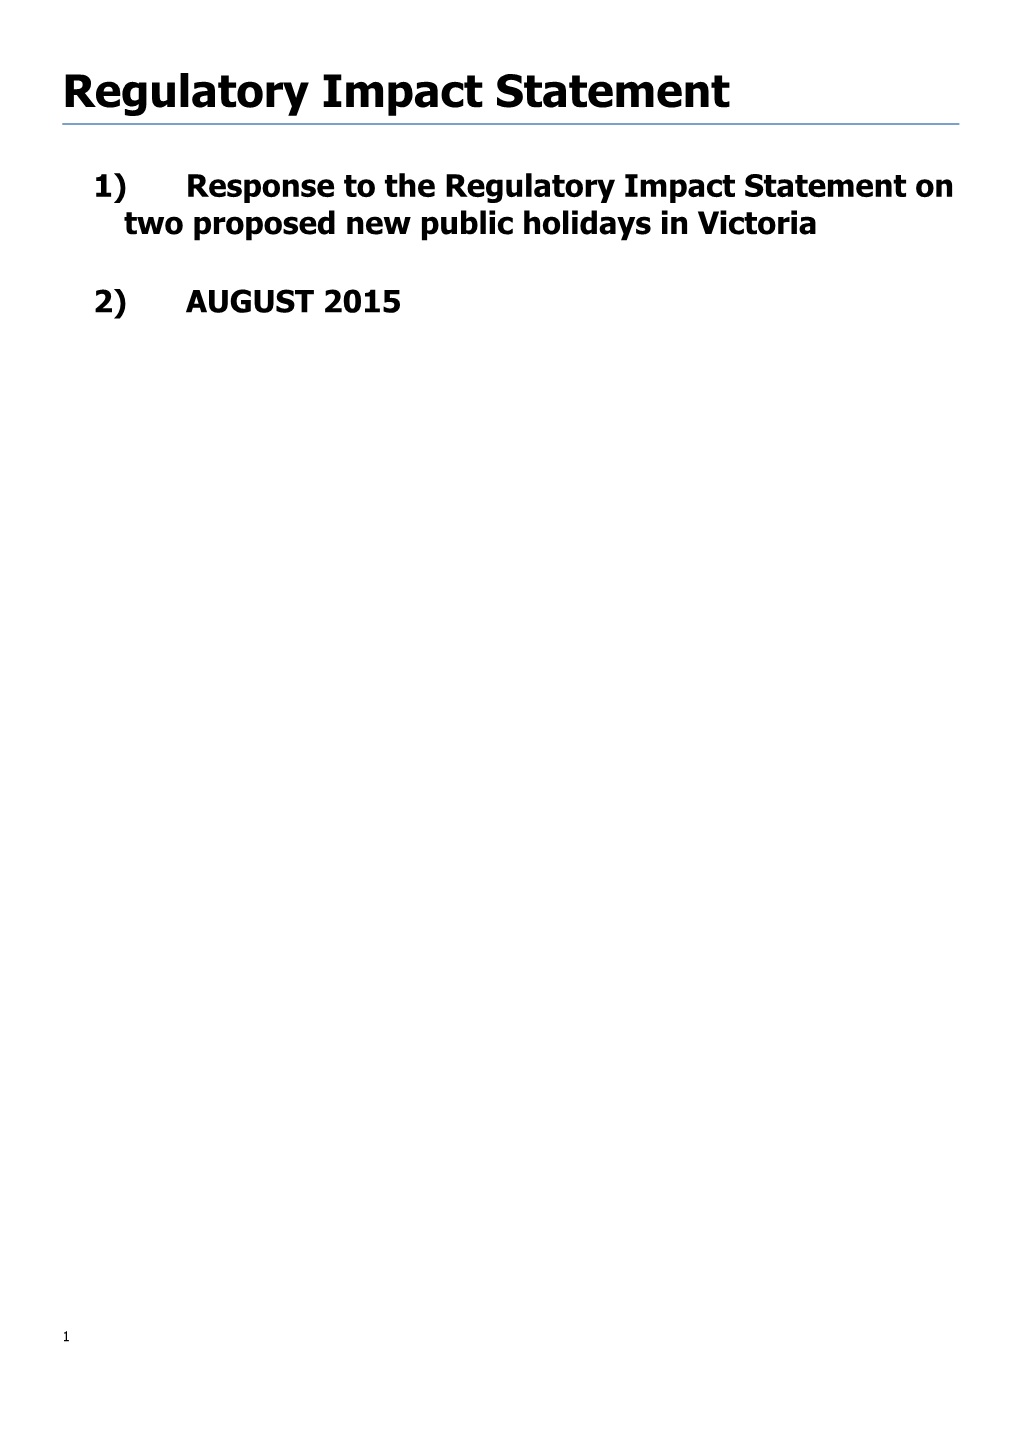 Response to the Regulatory Impact Statement on Two Proposed New Public Holidays in Victoria